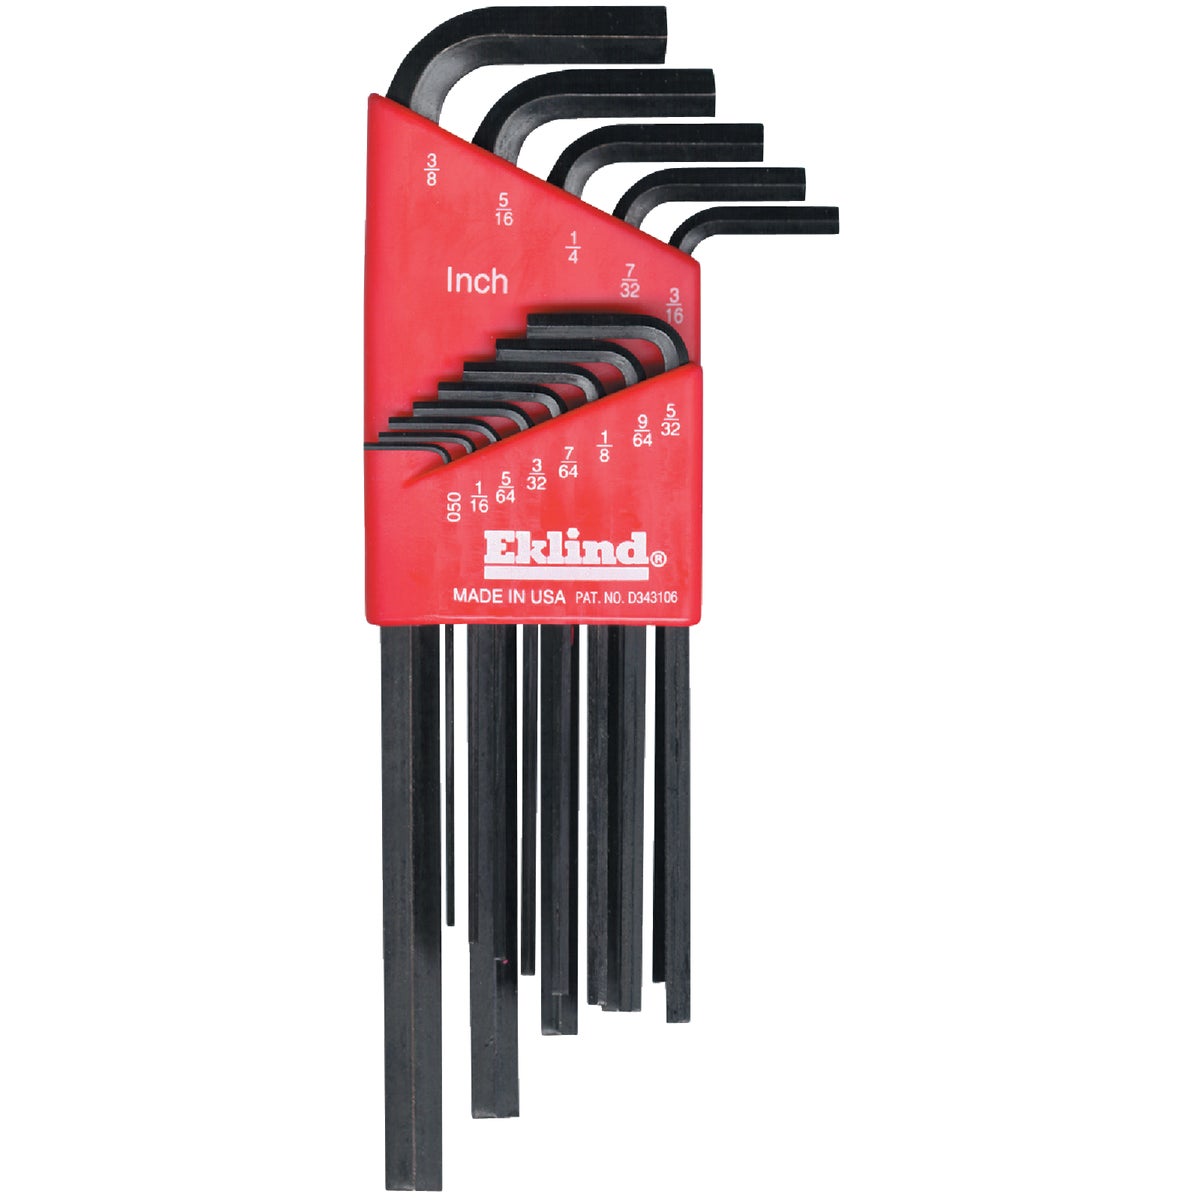 Item 348805, Includes hex keys in sizes: .